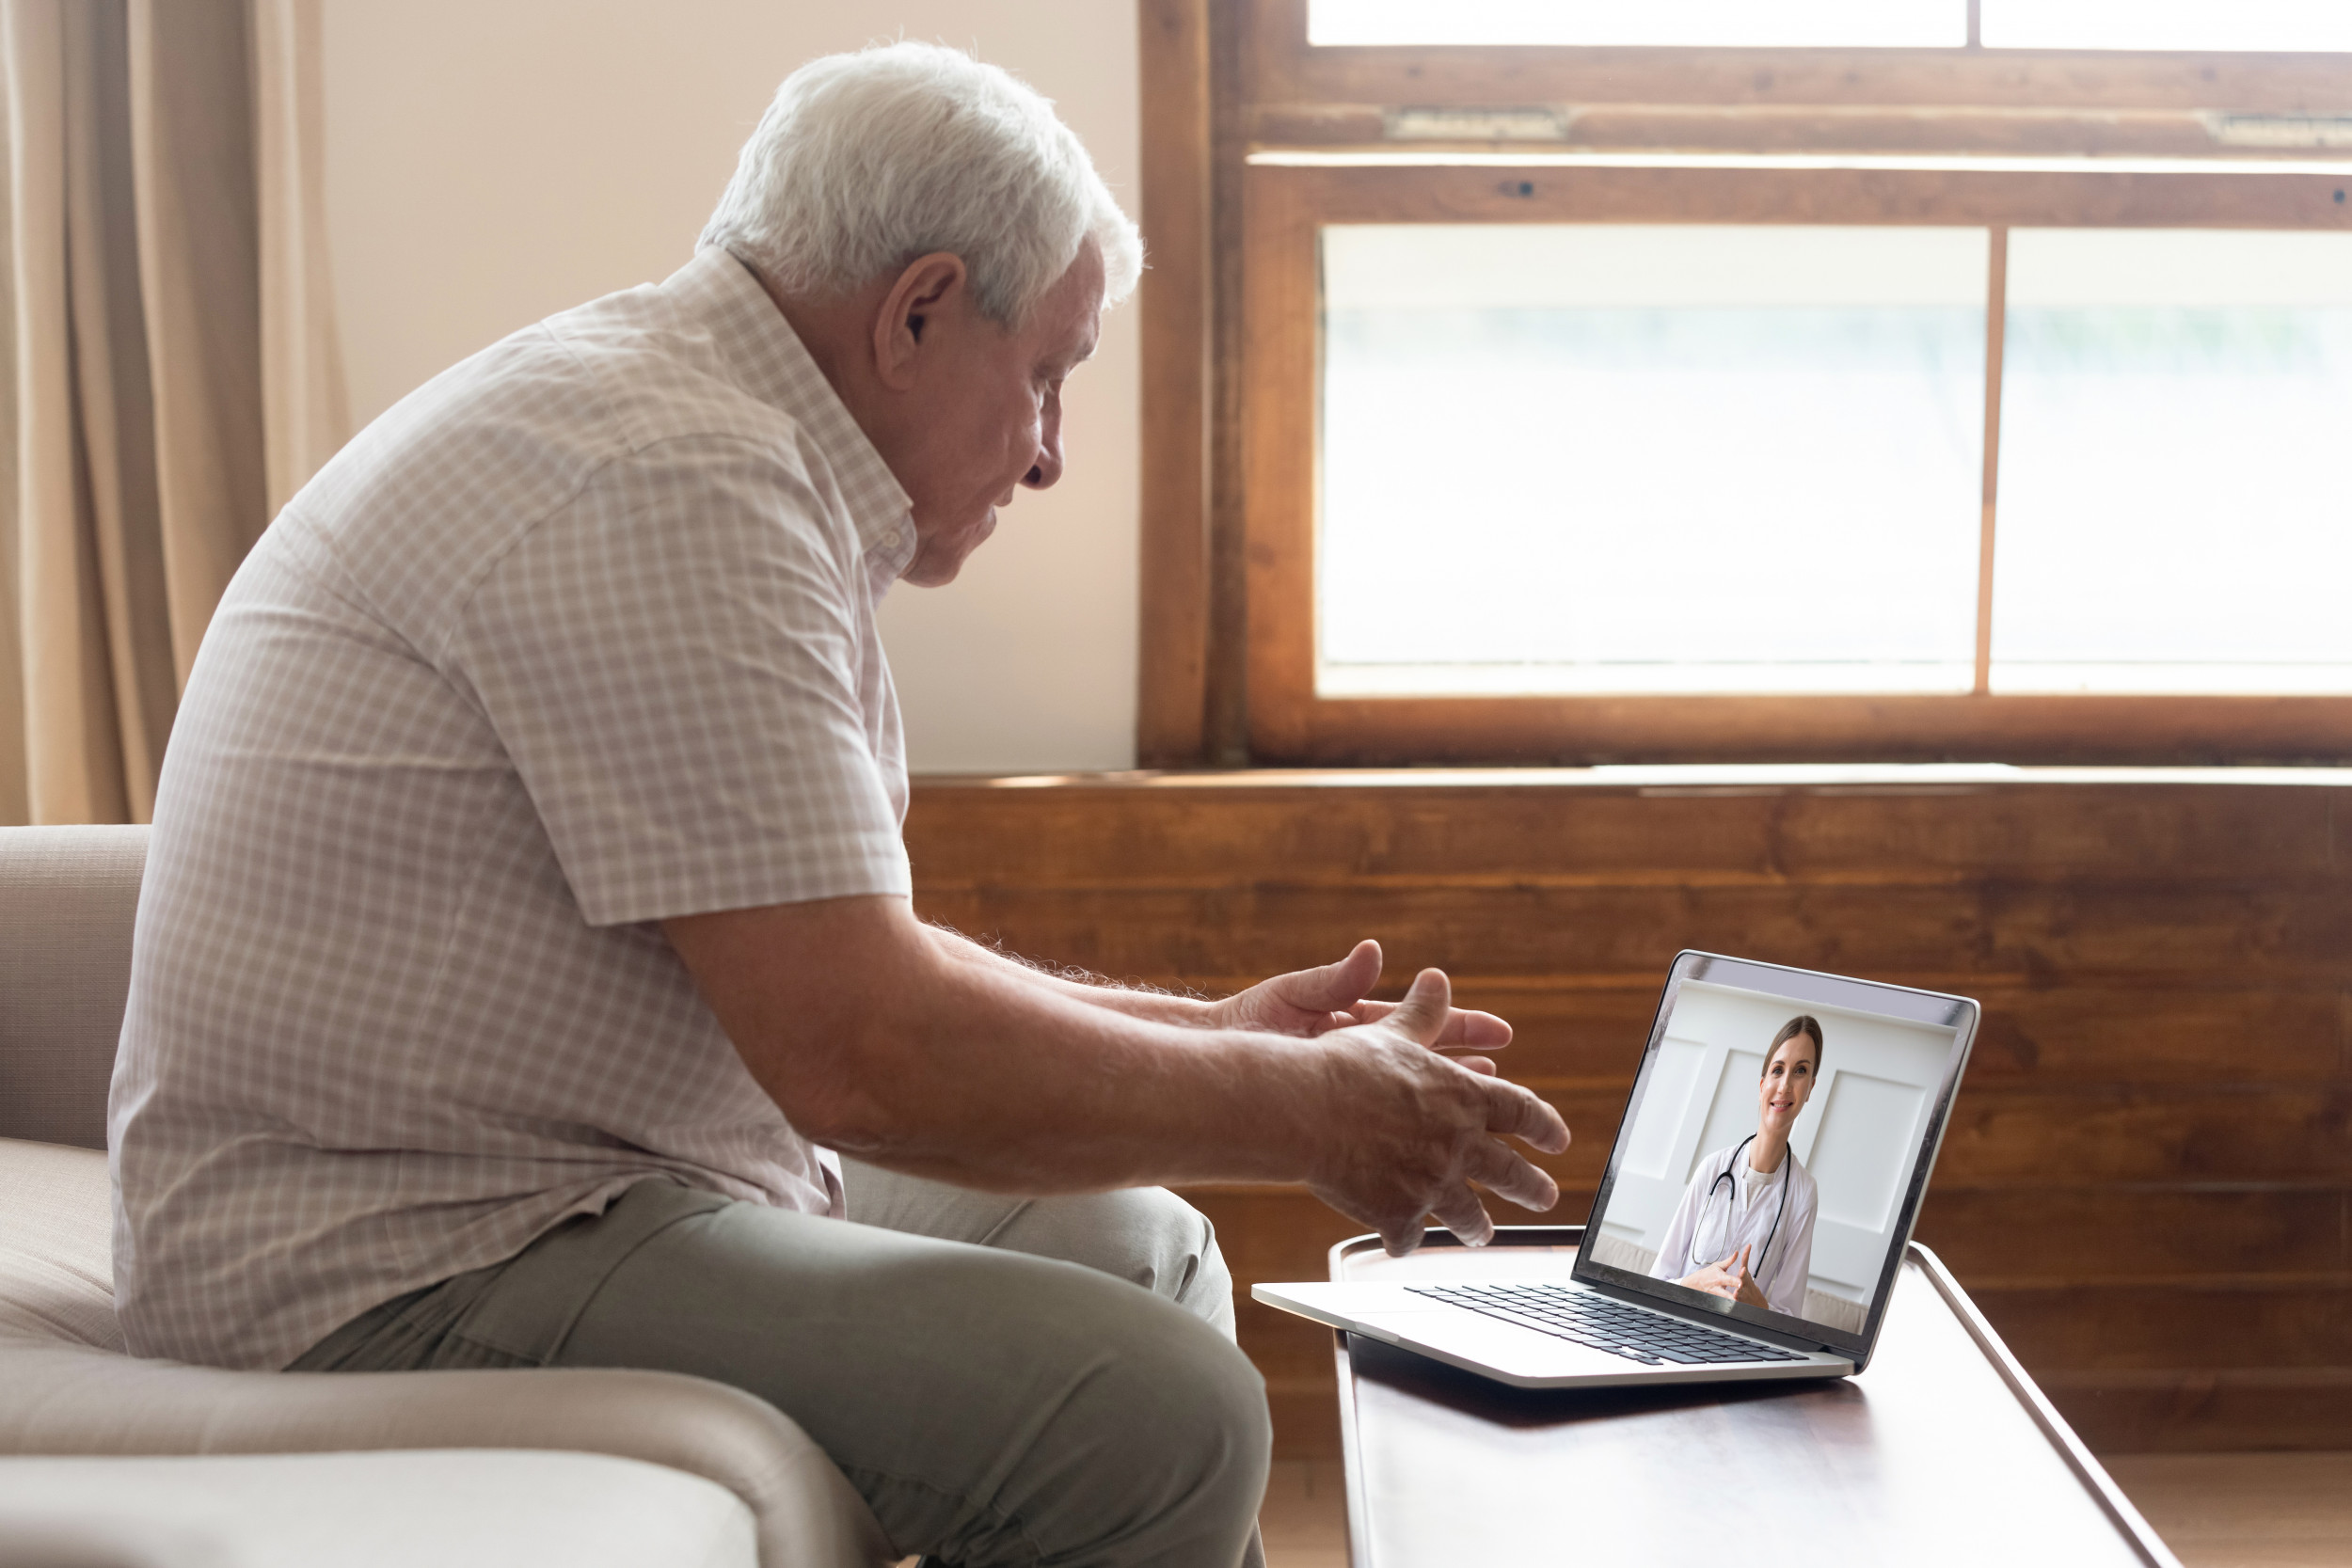 Clear accurate communication in a telehealth call